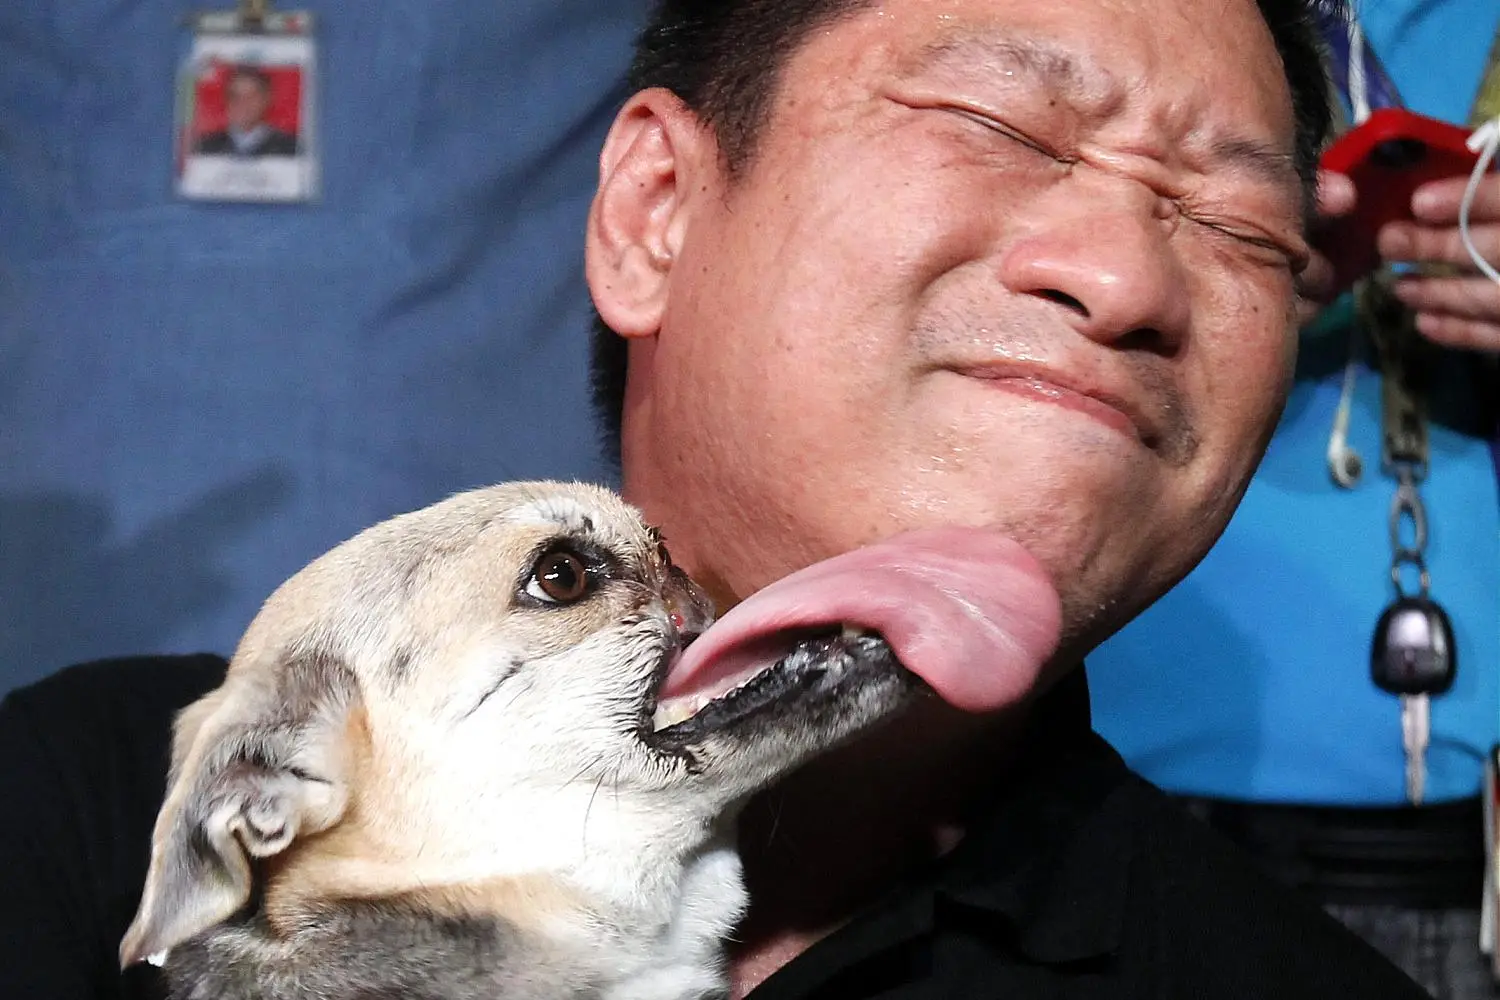 The Heartwarming Kabang Dog Story From Tragedy to Triumph